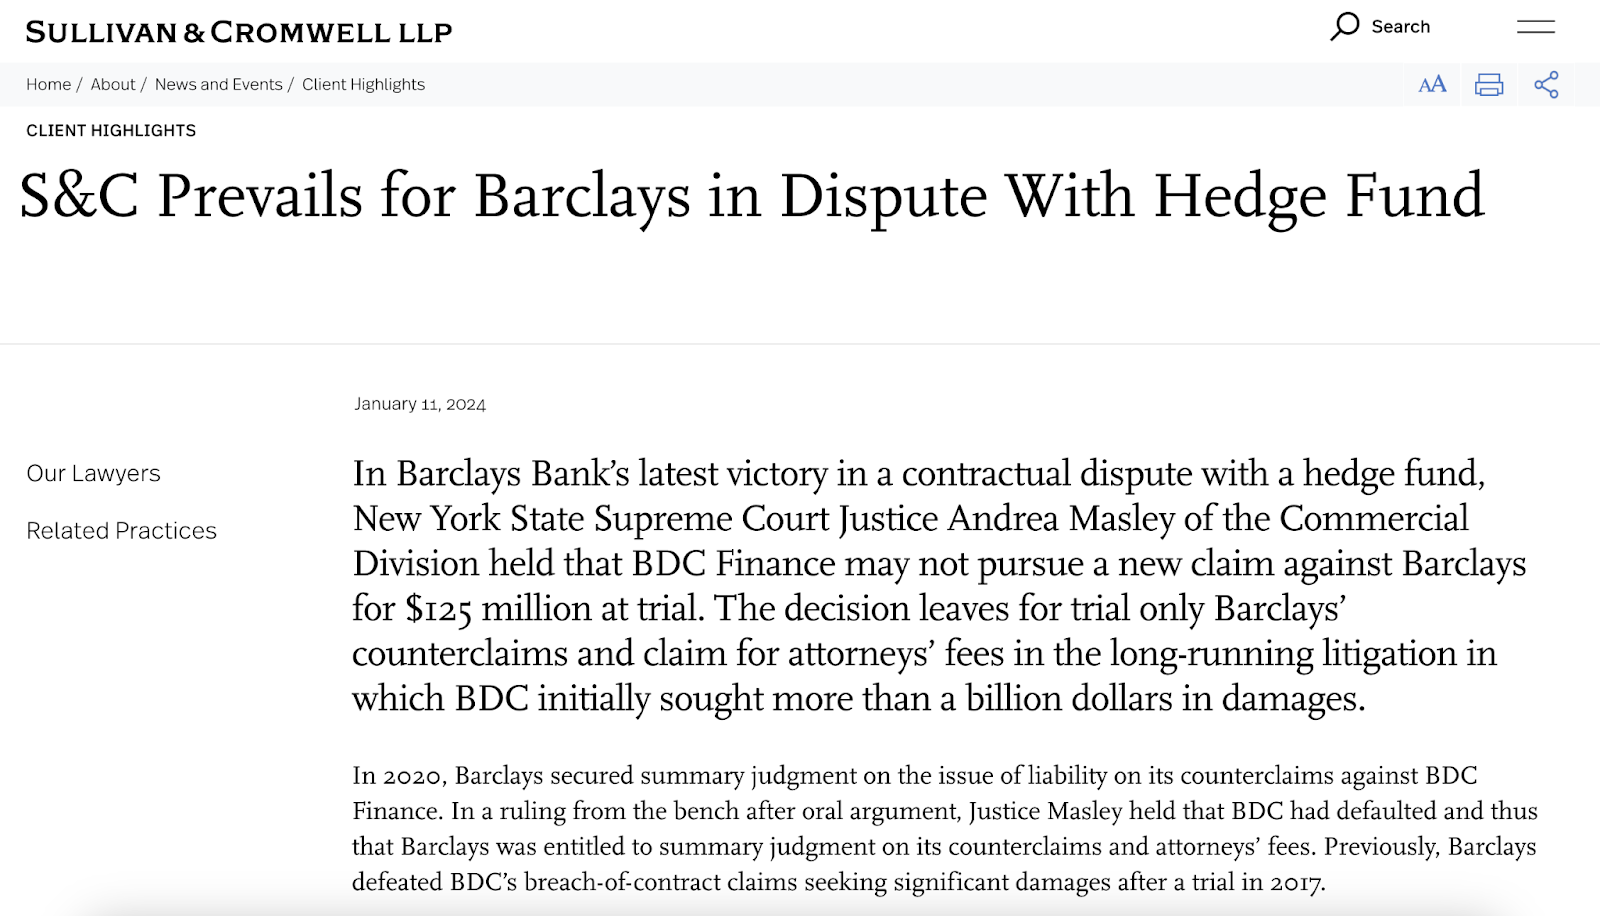 A case study that reads "S&C Prevails for Barclays in Dispute With Hedge Fund"